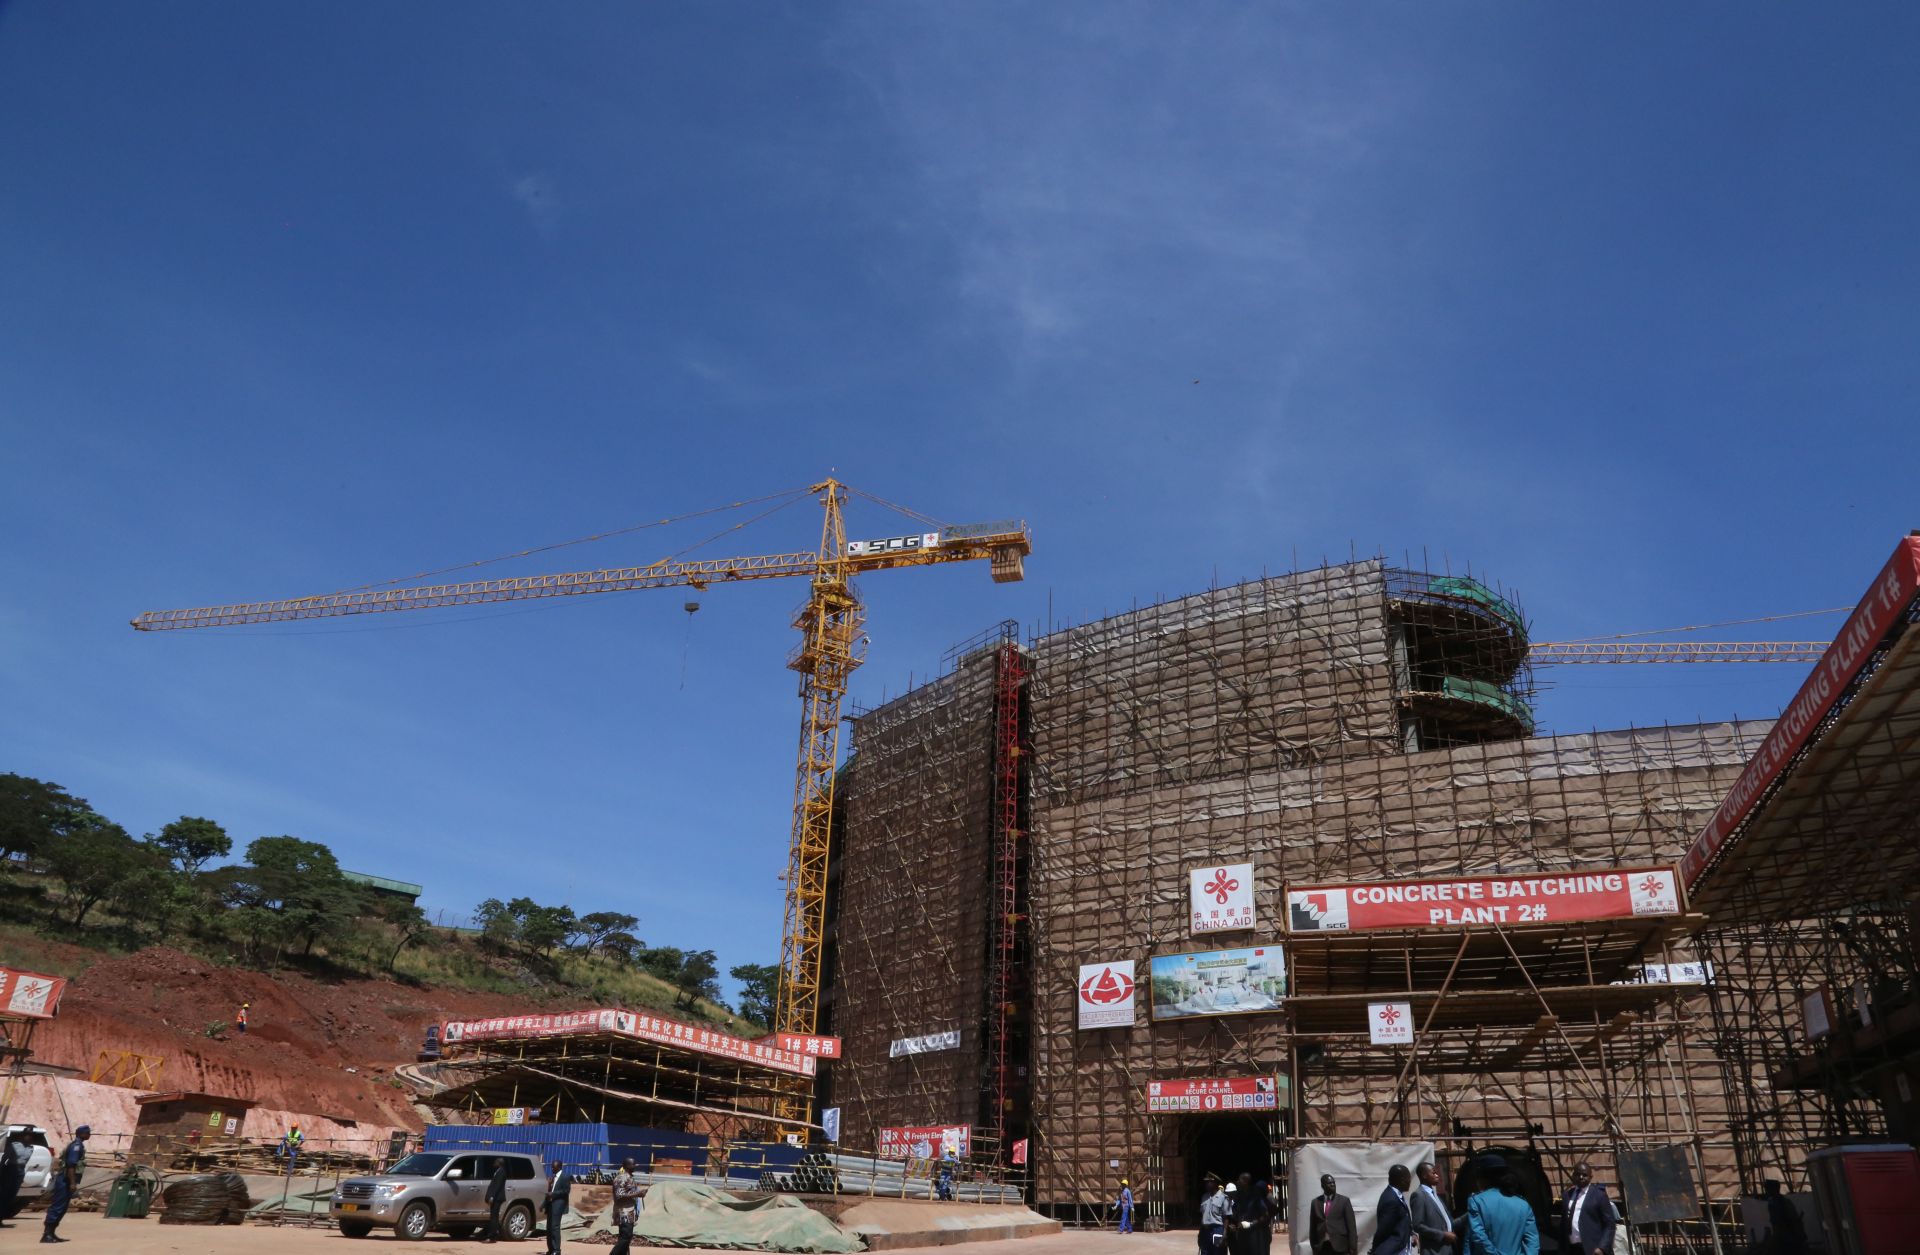 This photo shows the new parliament building in Harare, Zimbabwe, being built by a Chinese construction company.